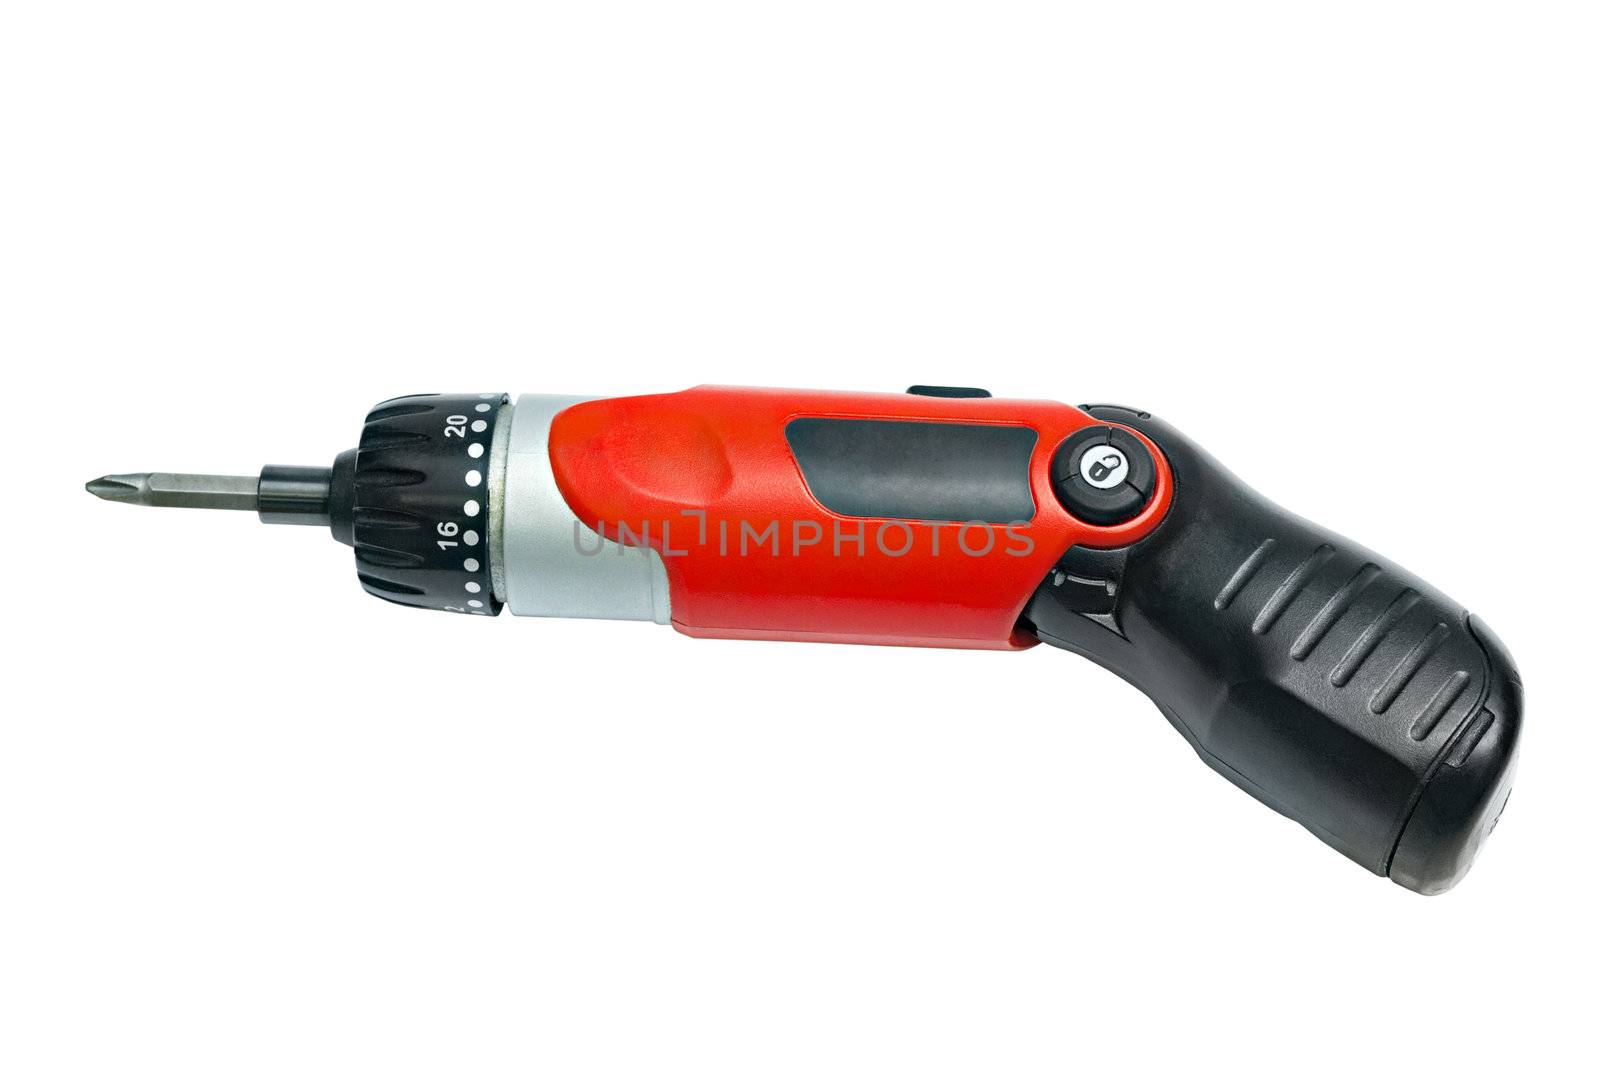 rechargeable electric drill by Plus69